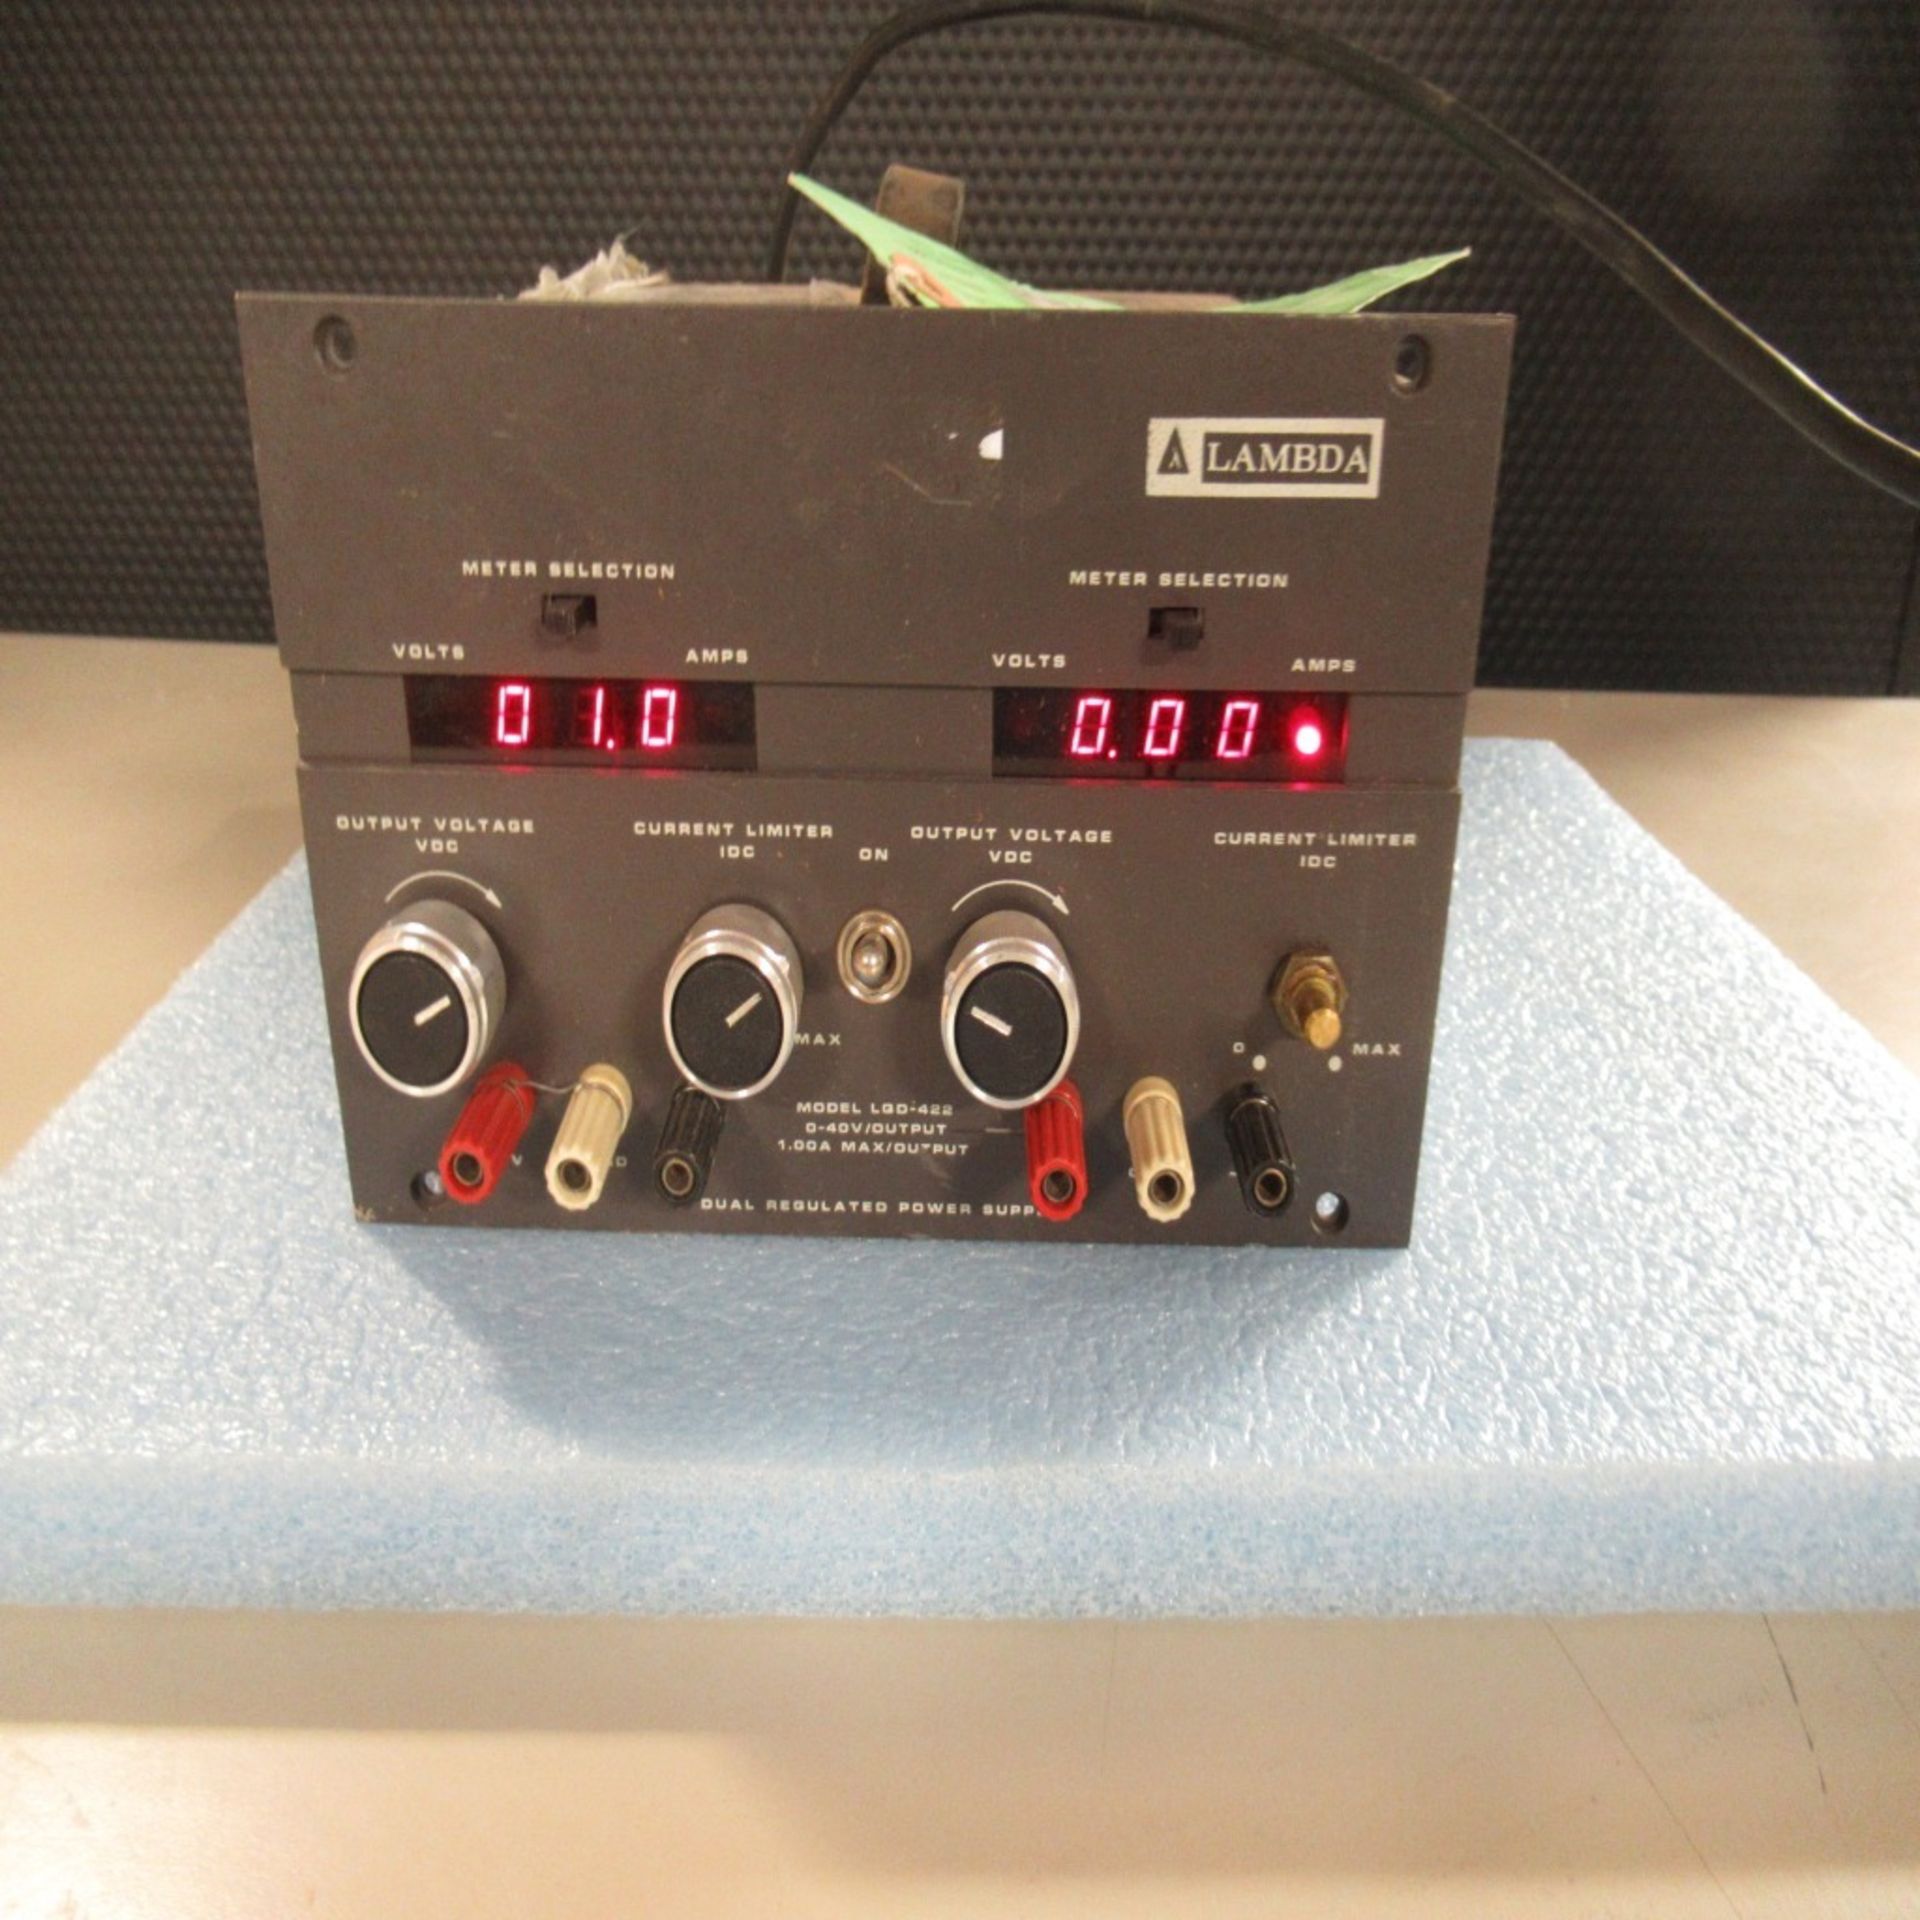 PHOTON SNAP SHOT MODEL 6000 *POWERS ON* NO SCREEN DISPLAY; FARNELL AP20-80 REGULATED POWER SUPPLY * - Image 106 of 222